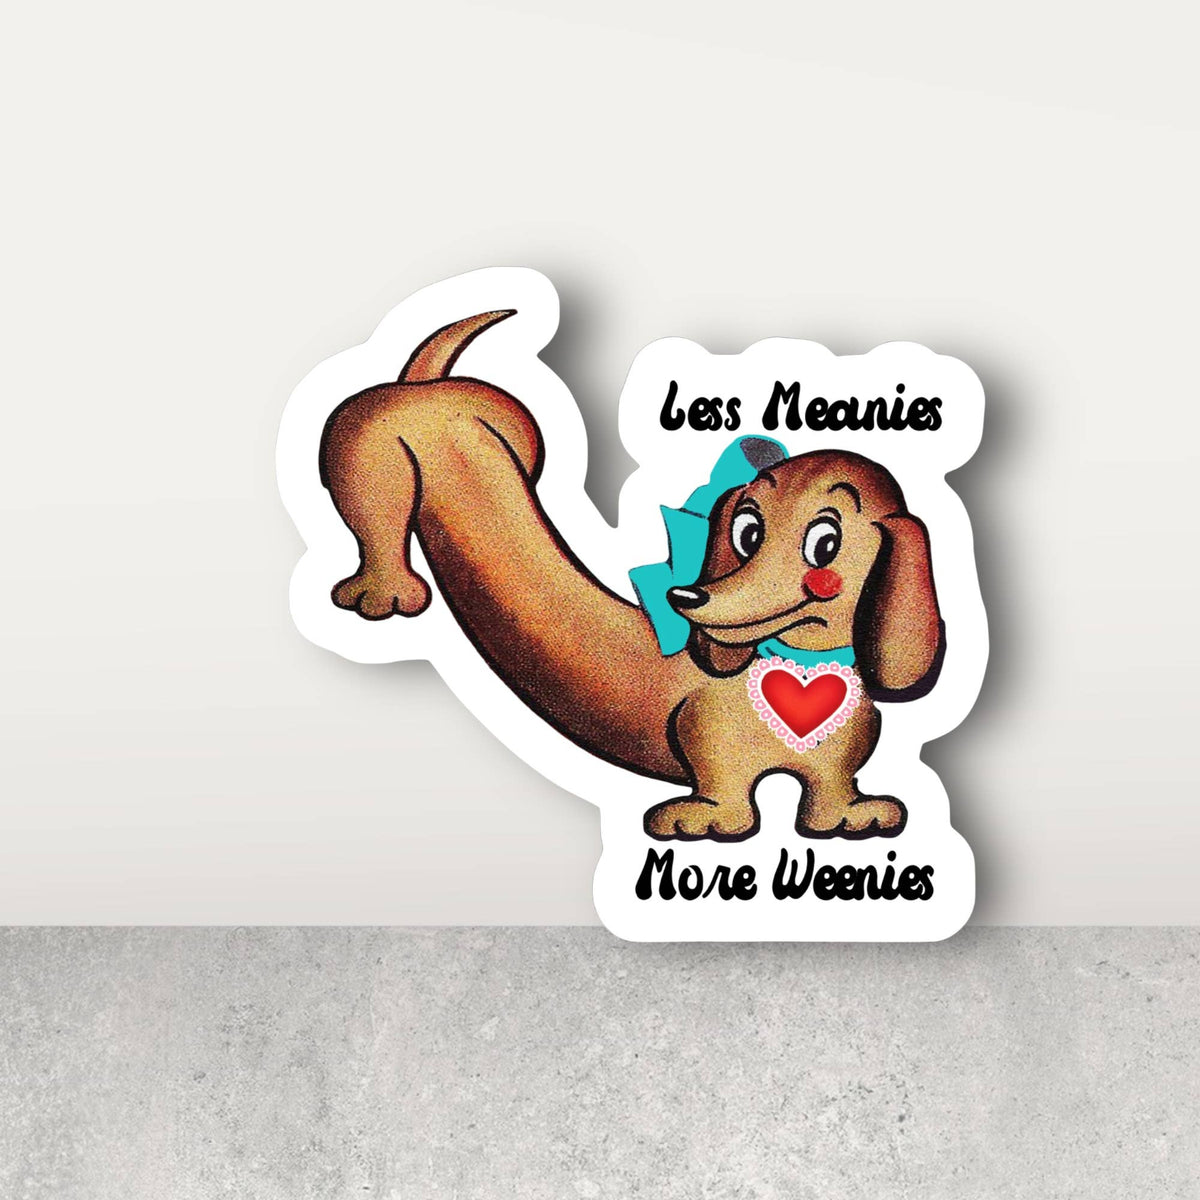 Less Meanies Sticker